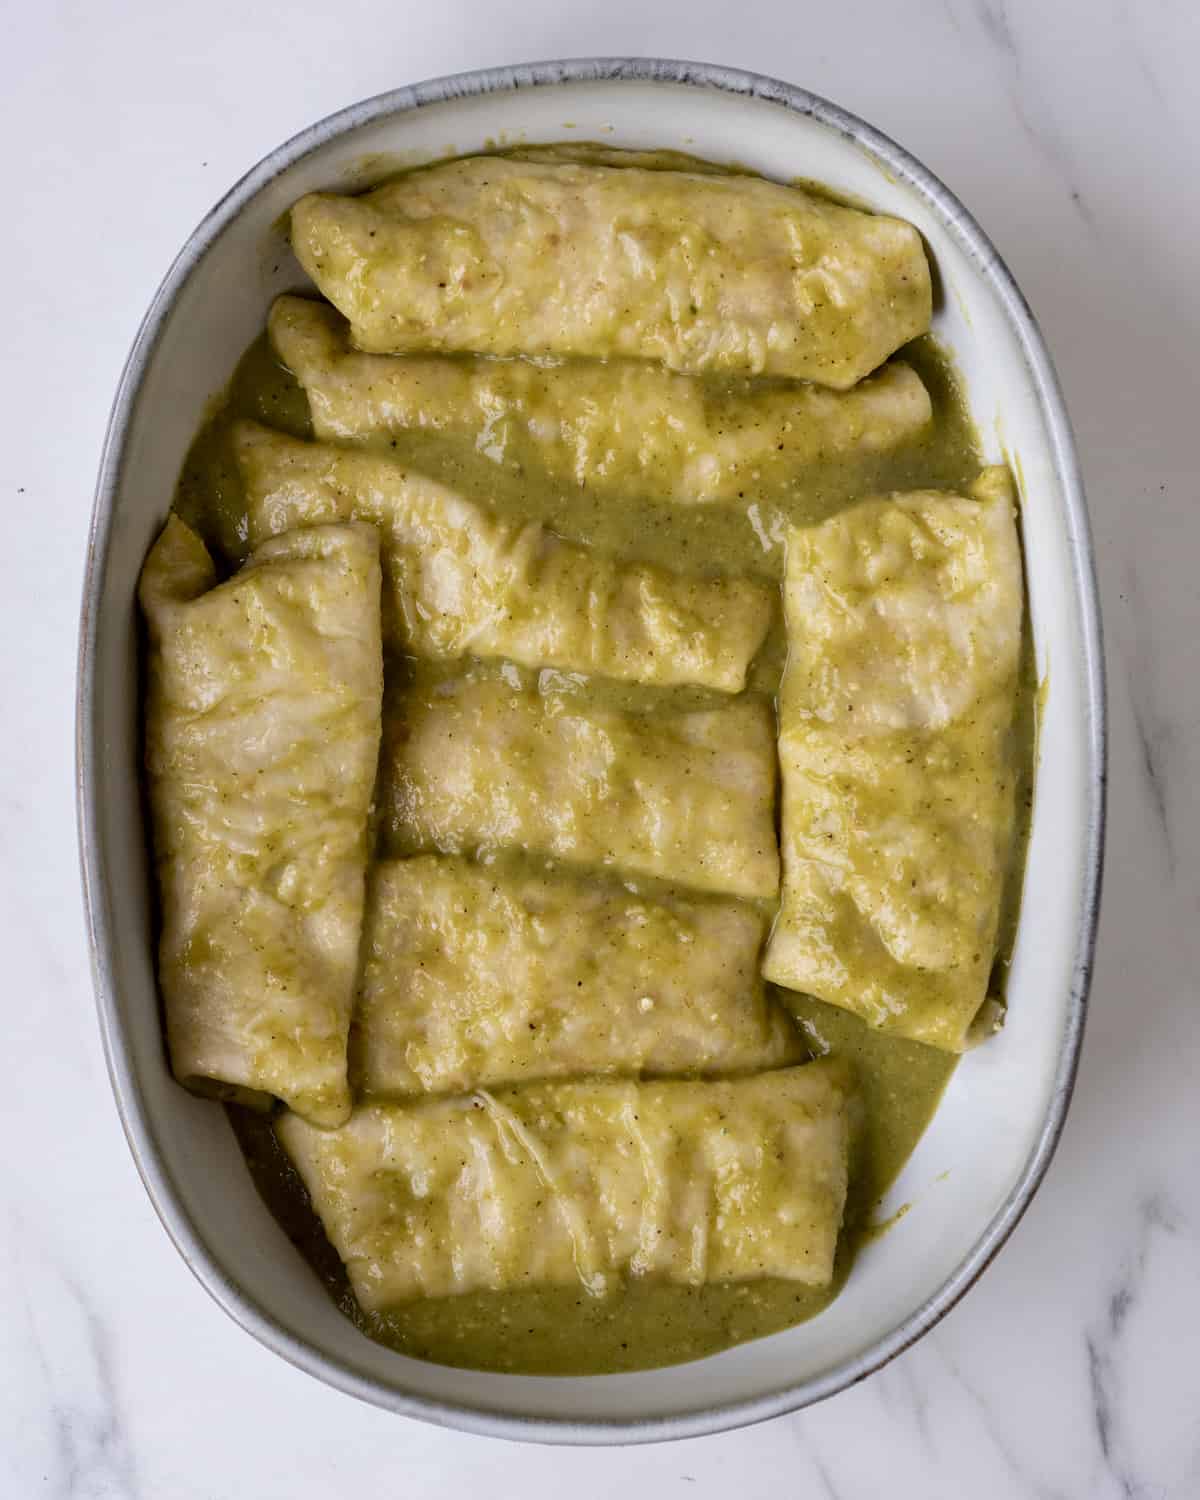 8 enchiladas filled with chicken sitting in a baking dish covered in the green enchilada sauce.  